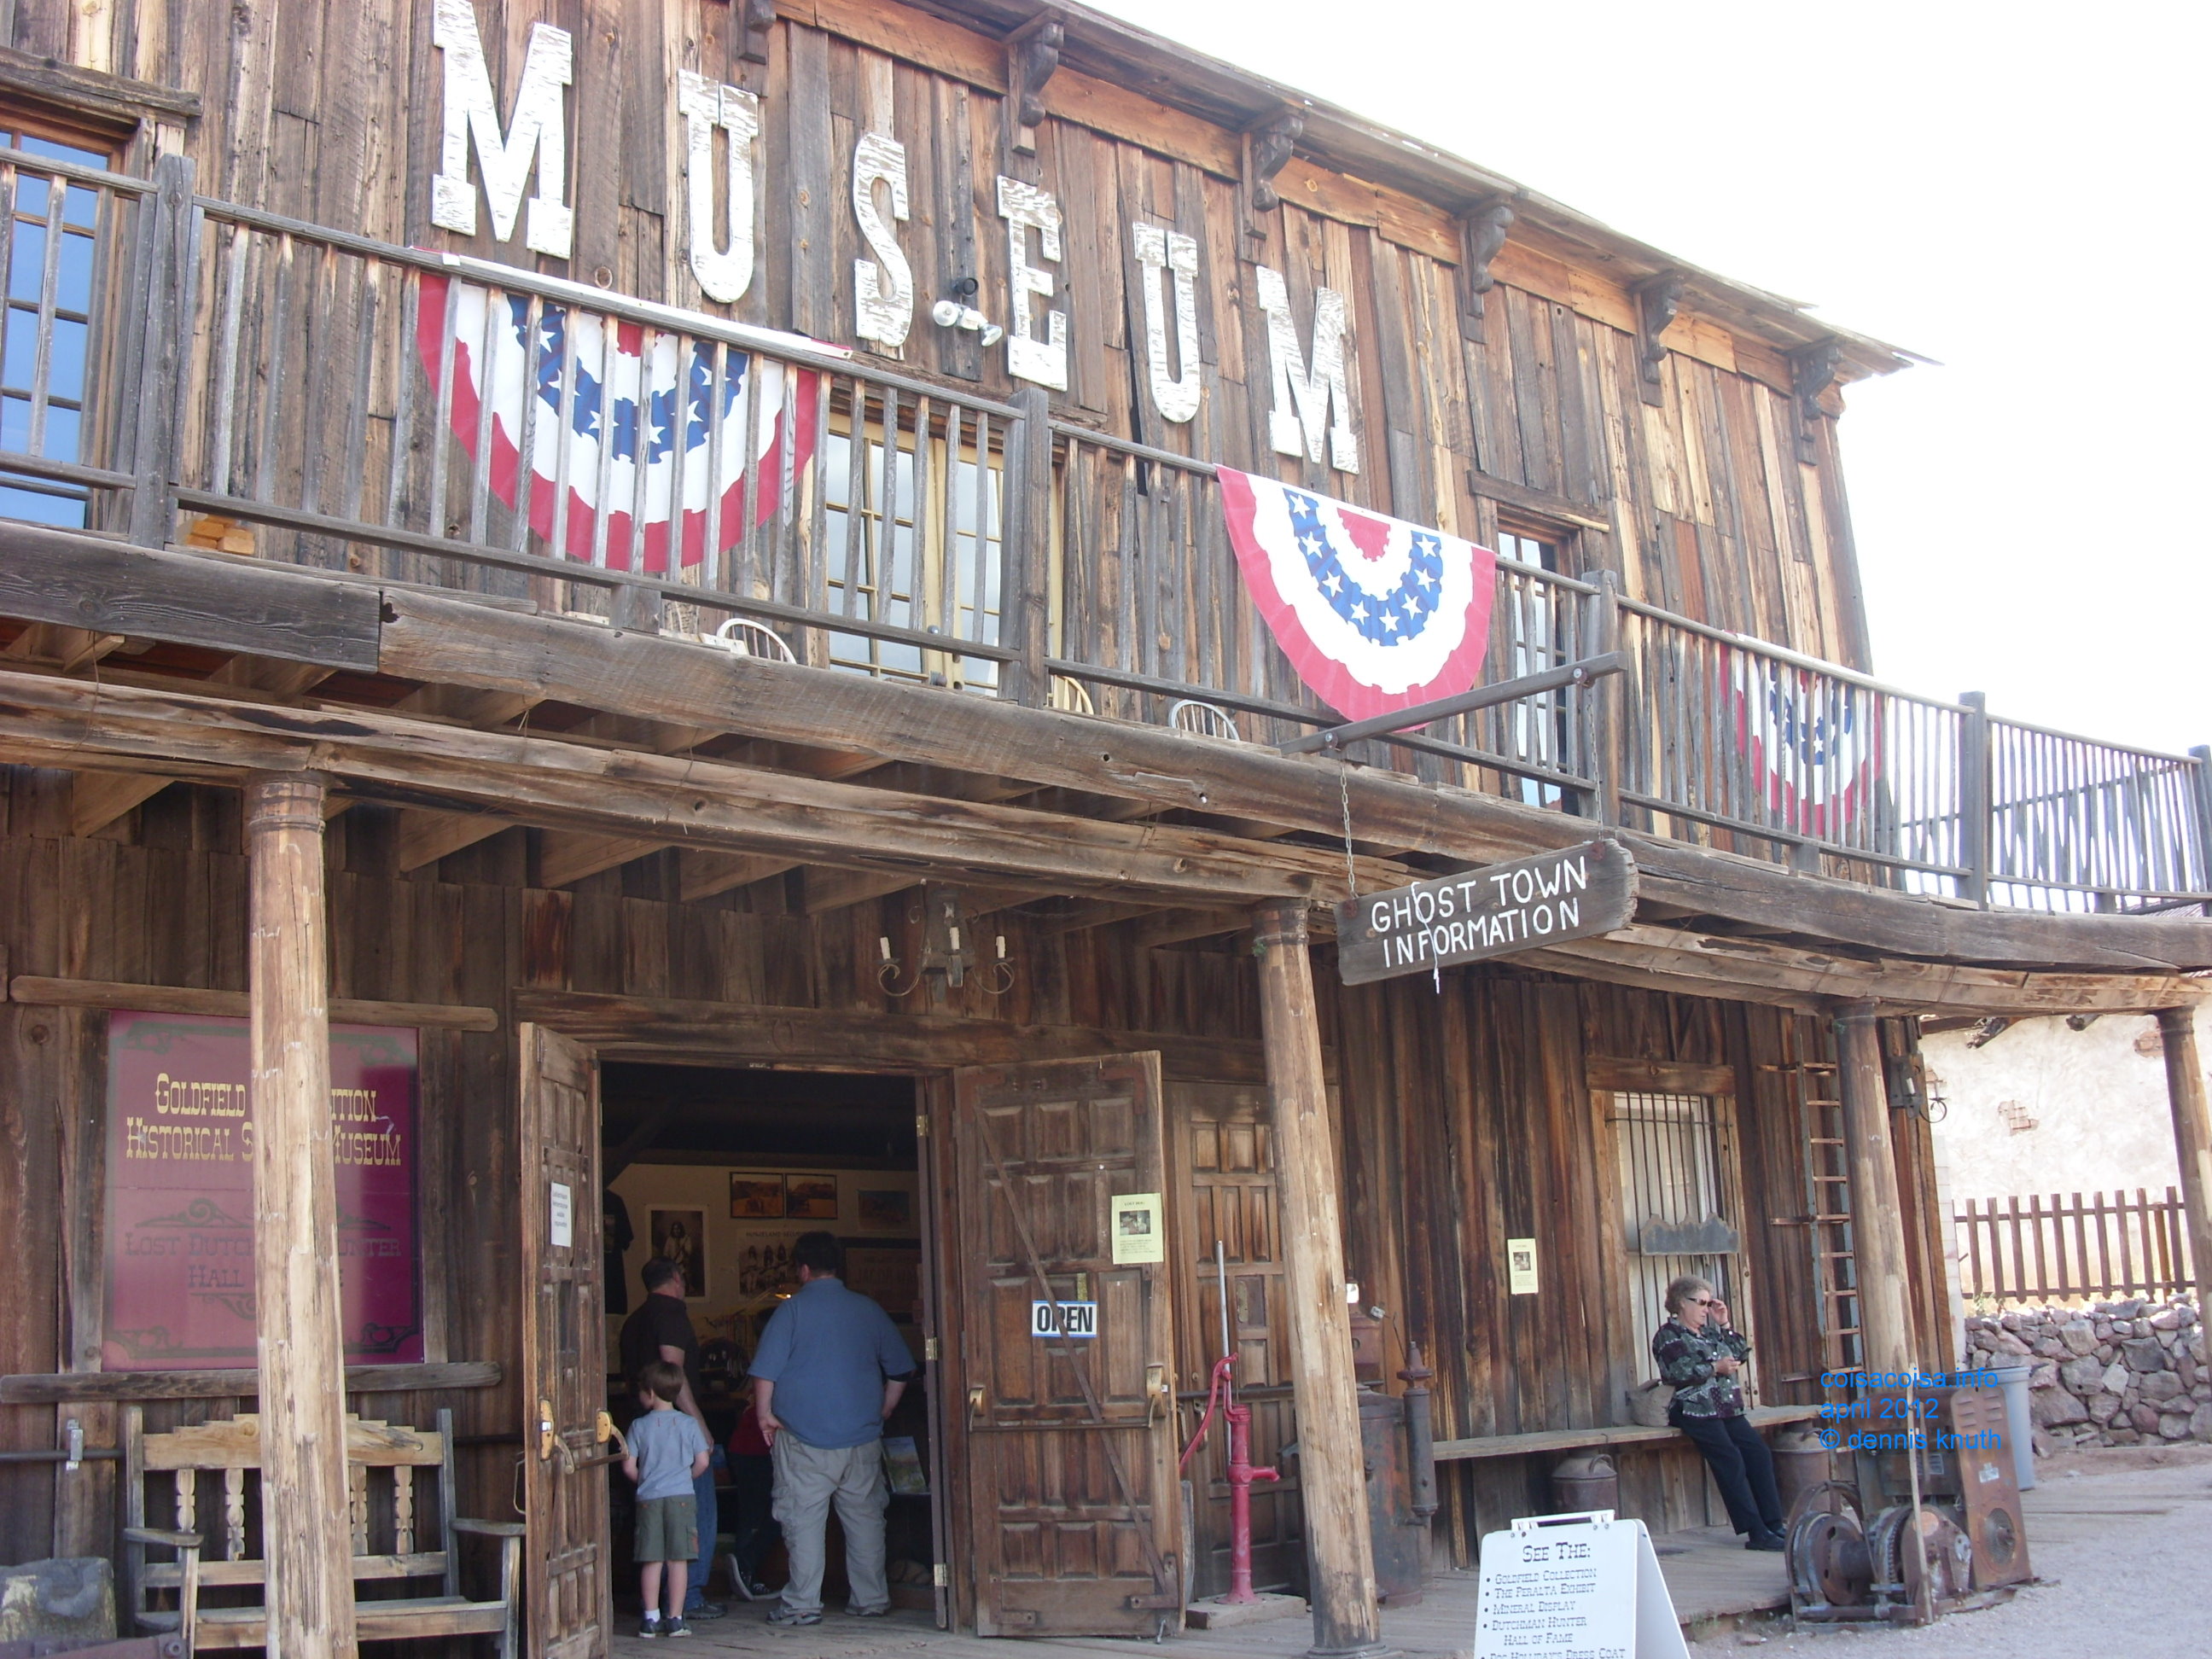 2012_04_26_e_apache_junction_ghost_town_0027.jpg (large)